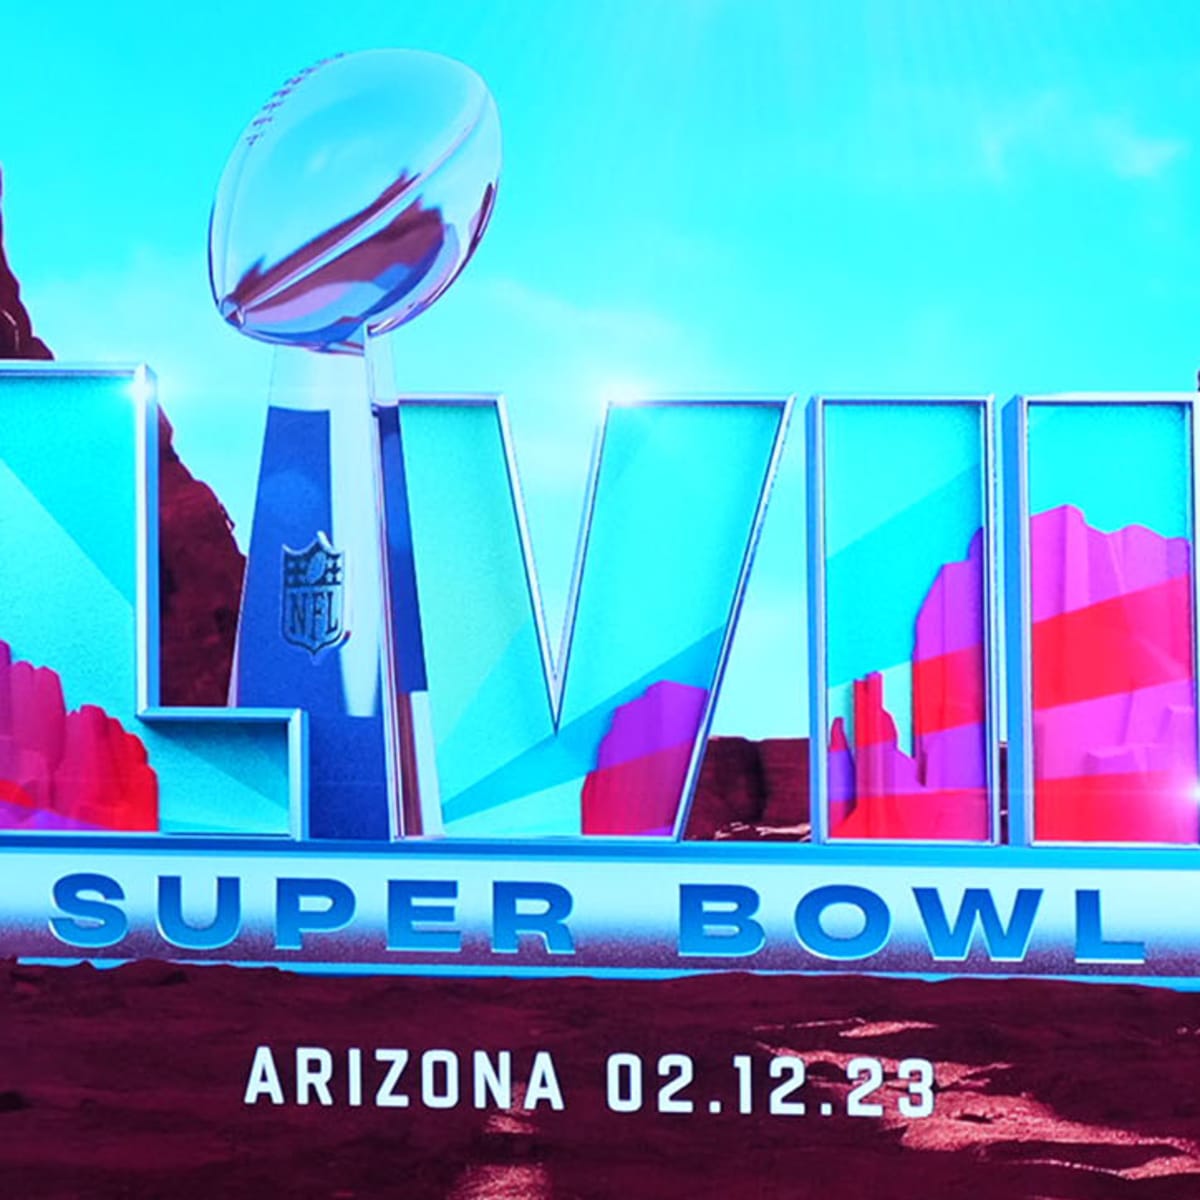 What weekend is the Super Bowl 2023 scheduled for?